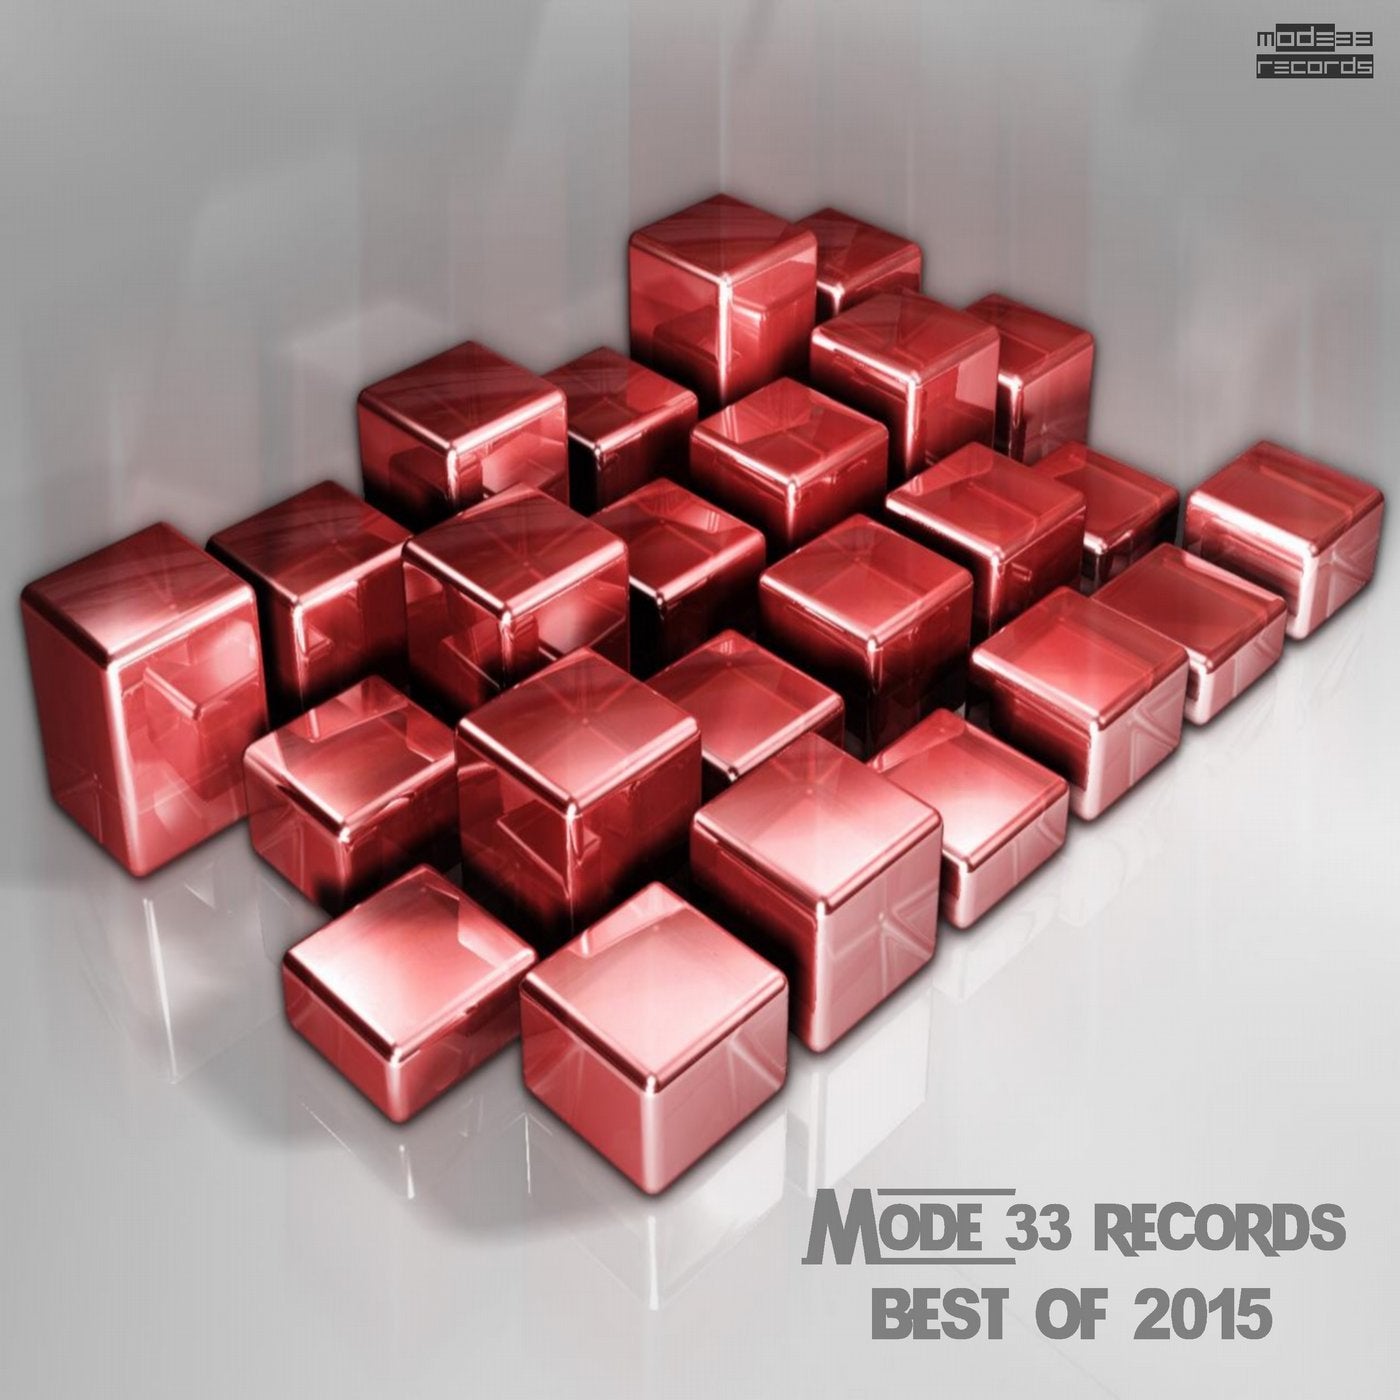 Mode 33 Records: Best of 2015